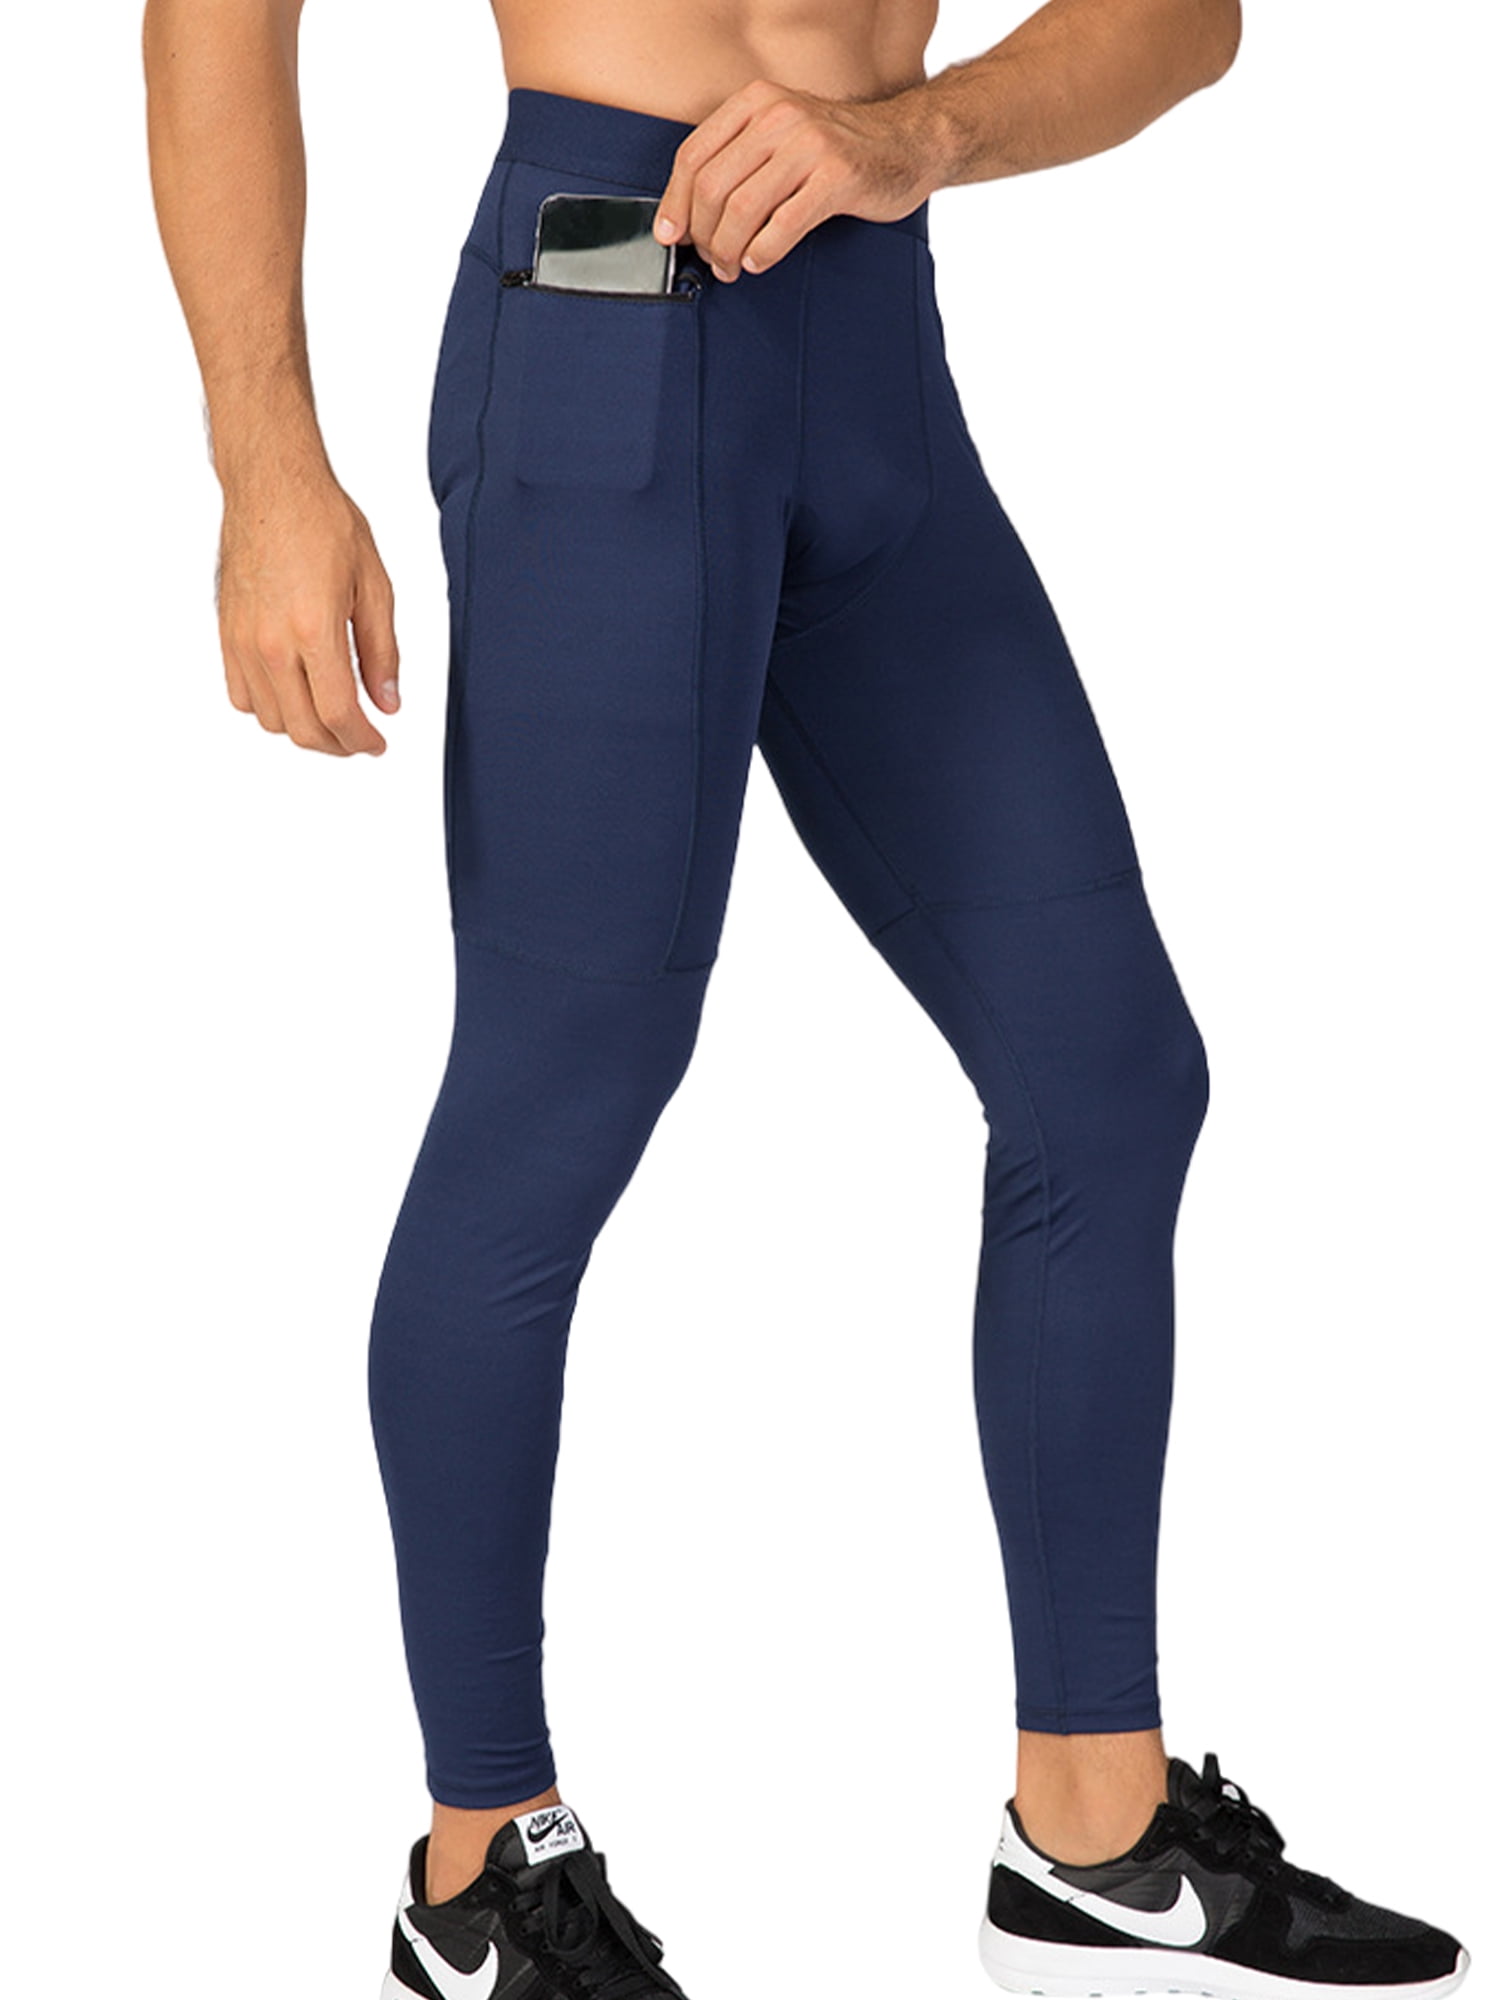 Frontwalk Mens Compression Pants High Waisted Leggings Cool Dry Tights  Running Athletic Sport Pant Elastic Waist Base Layer Navy Blue M